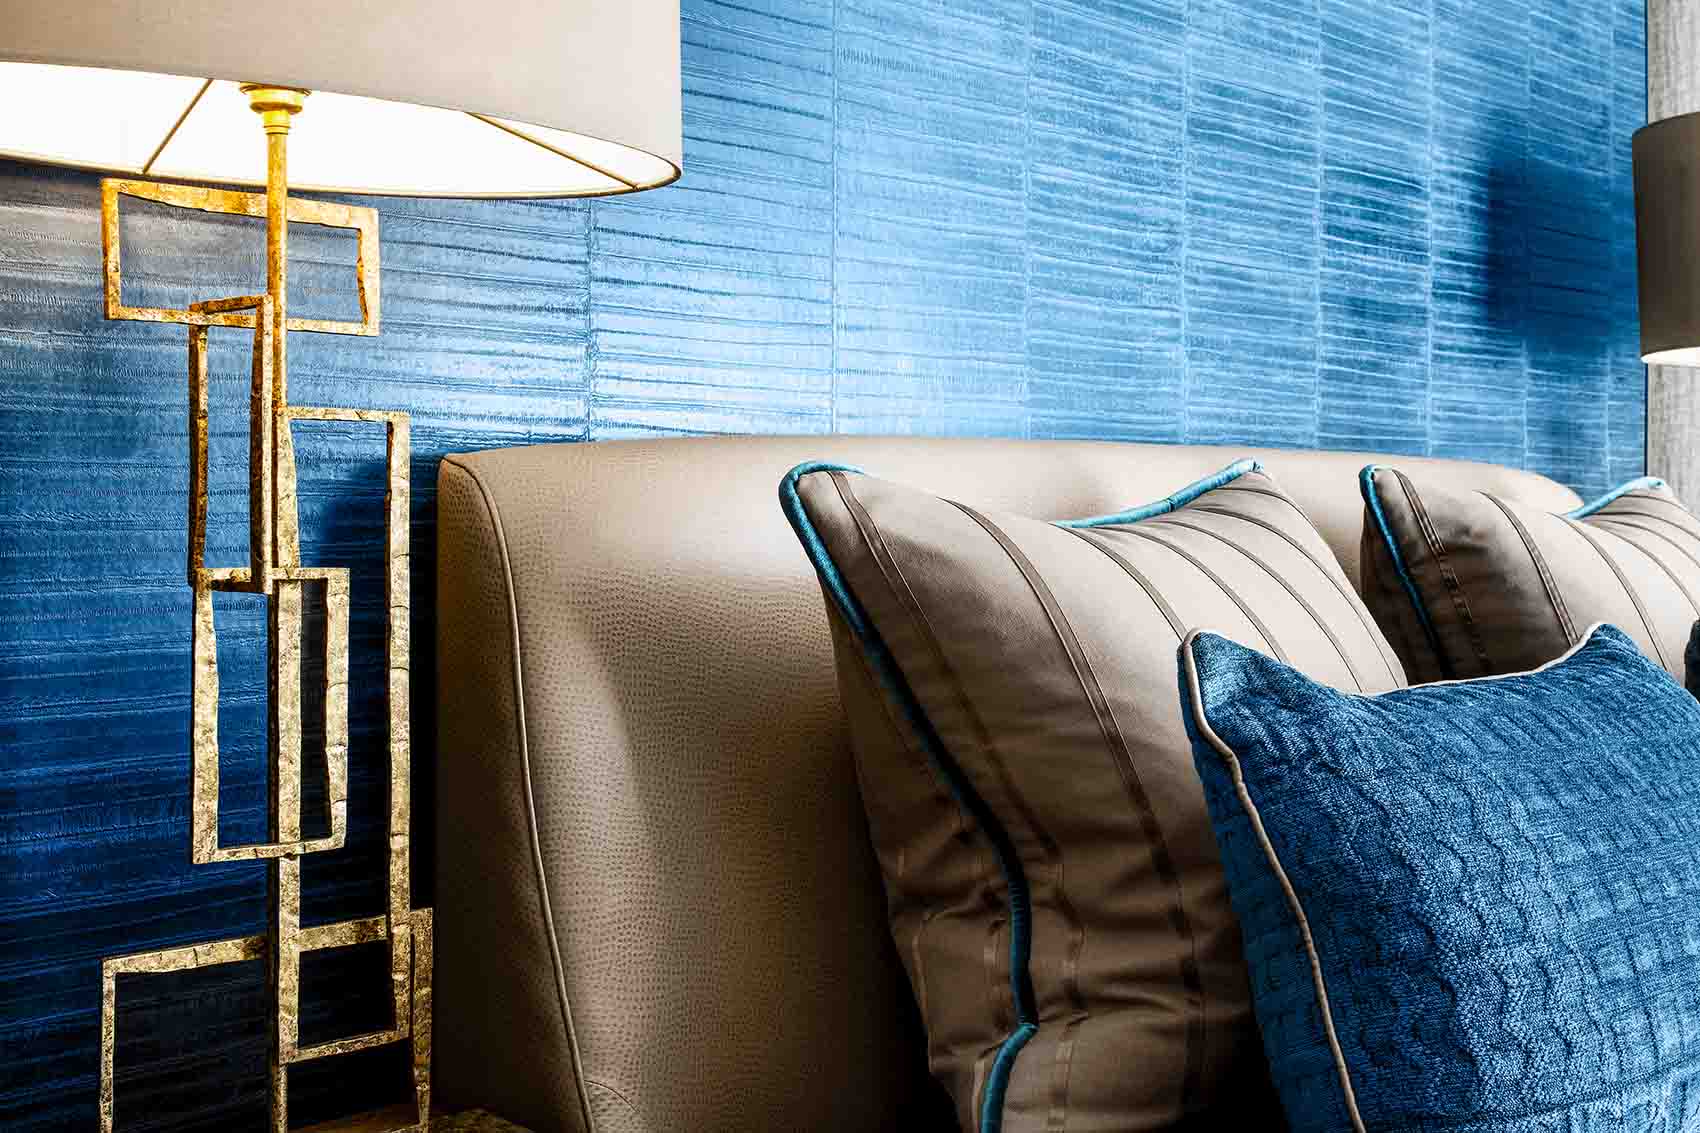 Teal eel skin wall paper, luxury high end velvet scatter cushions. Silk shades, gold lamps